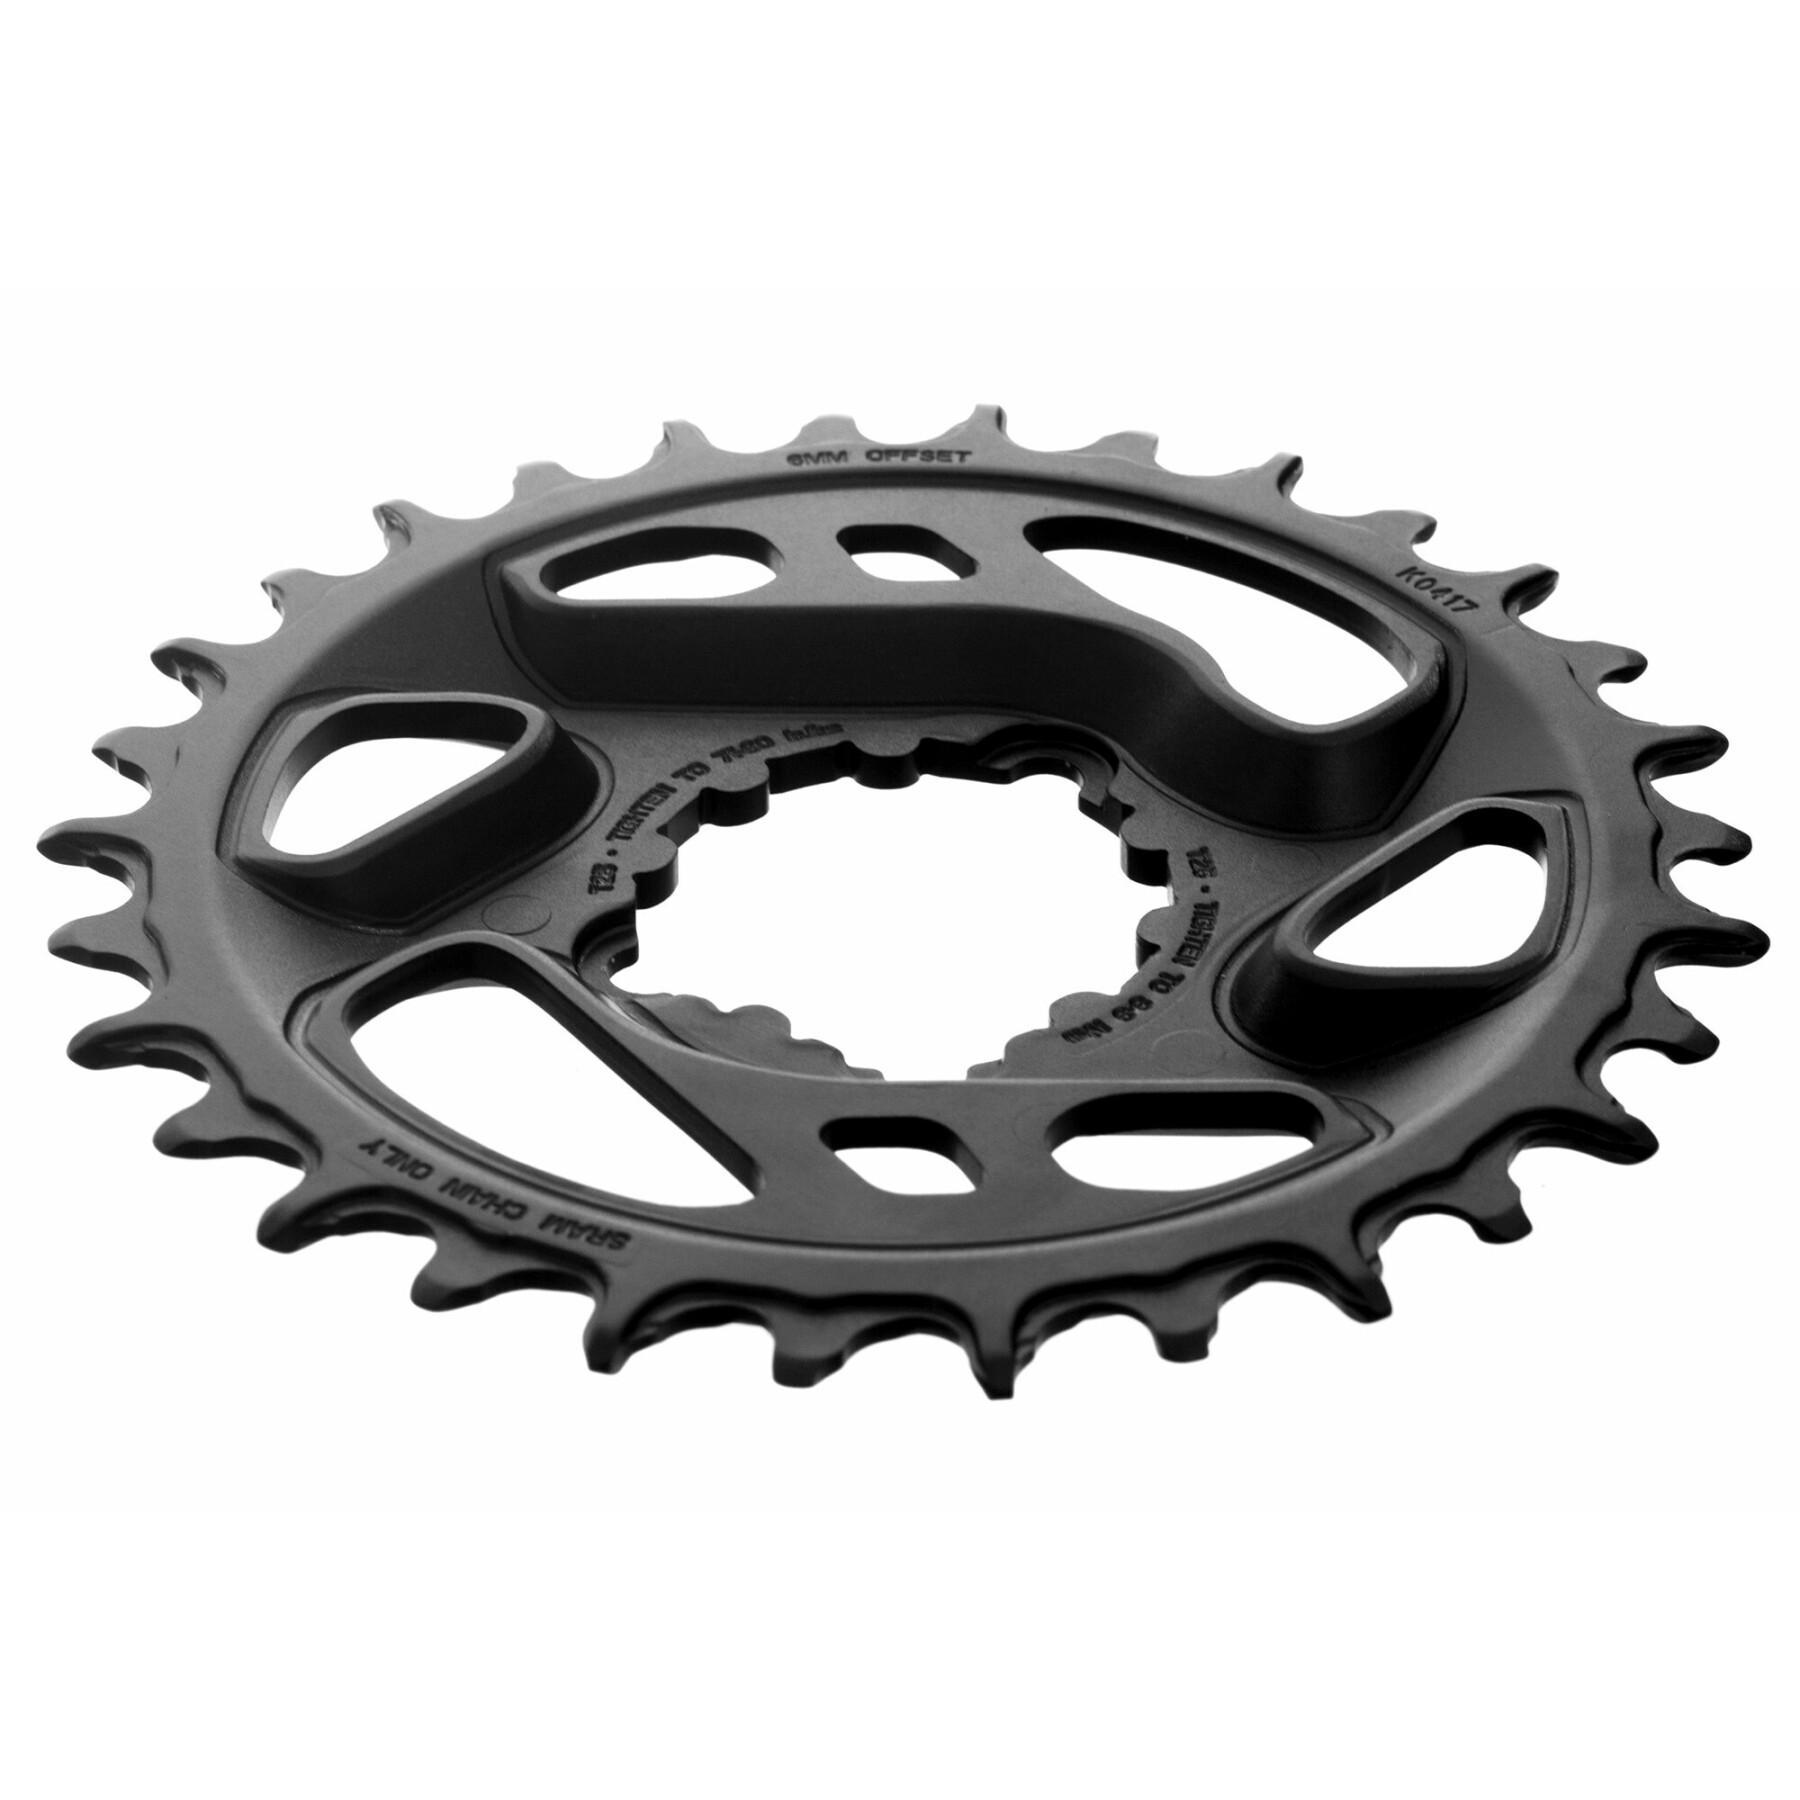 Tray Sram X-Sync Eagle cold forged 30T dm 6mm off